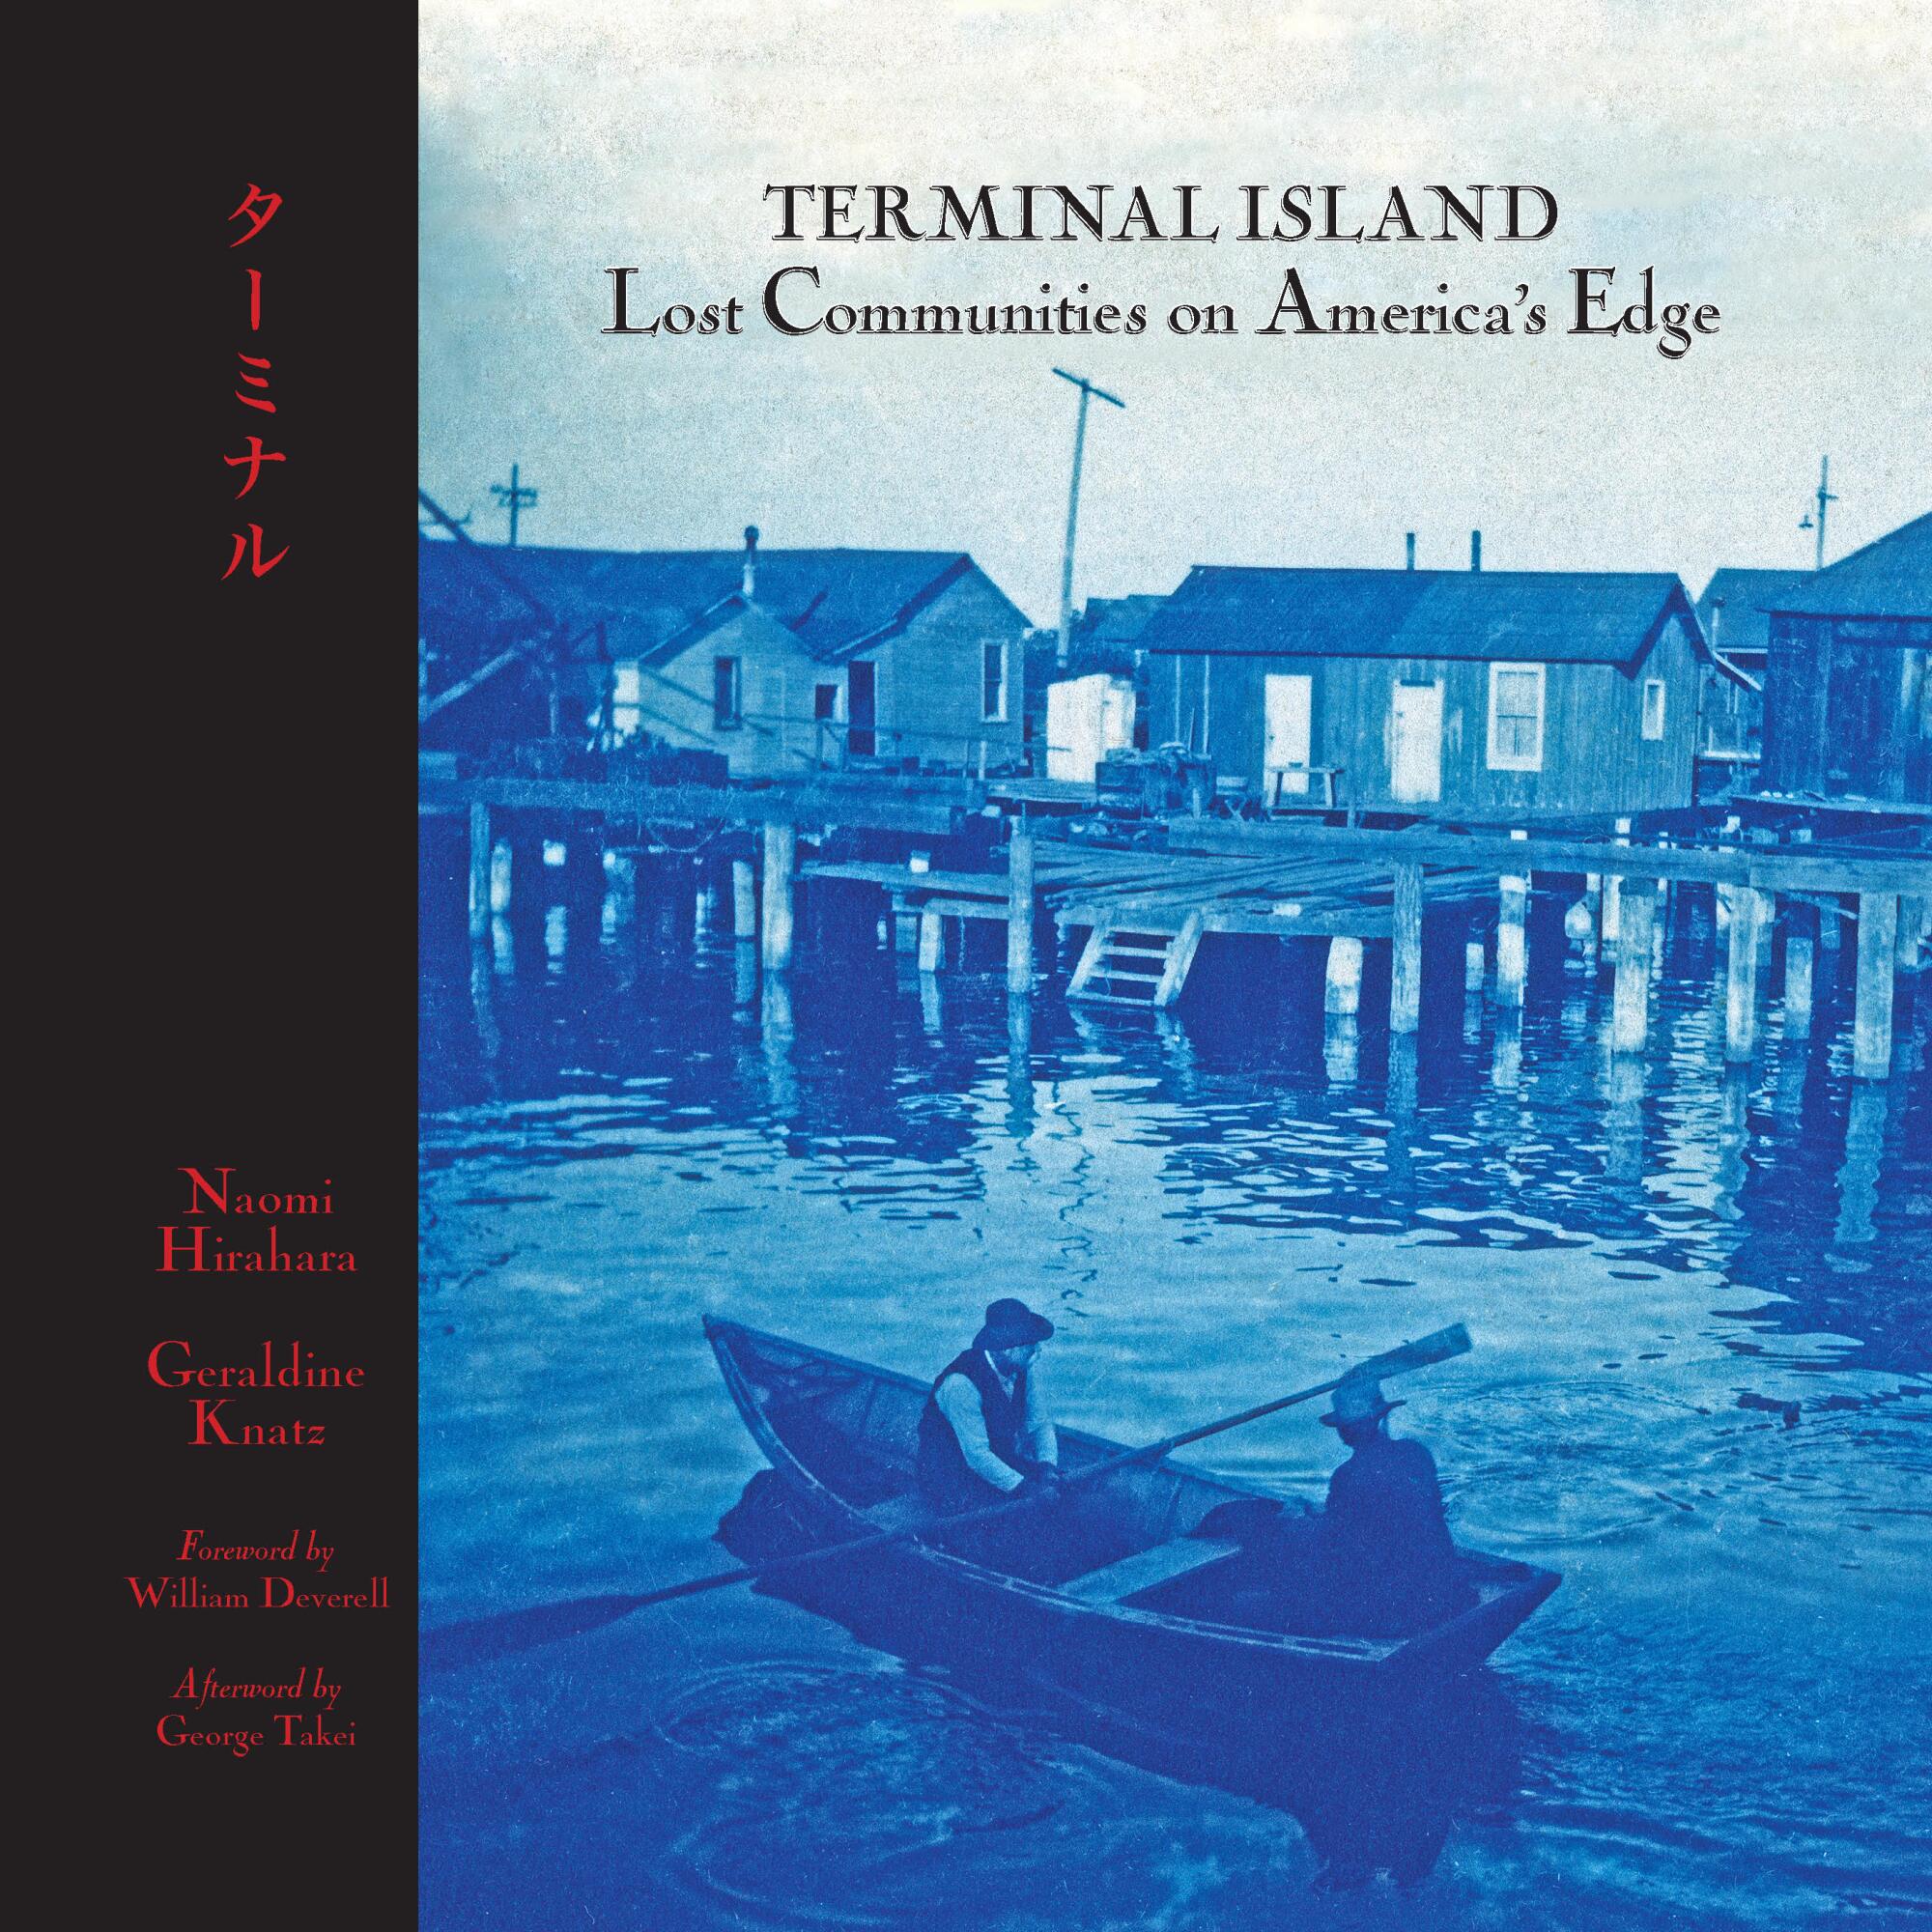 Cover of the new book "Terminal lsland: Lost Communities on America’s Edge" by Naomi Hirahara and Geraldine Knatz.